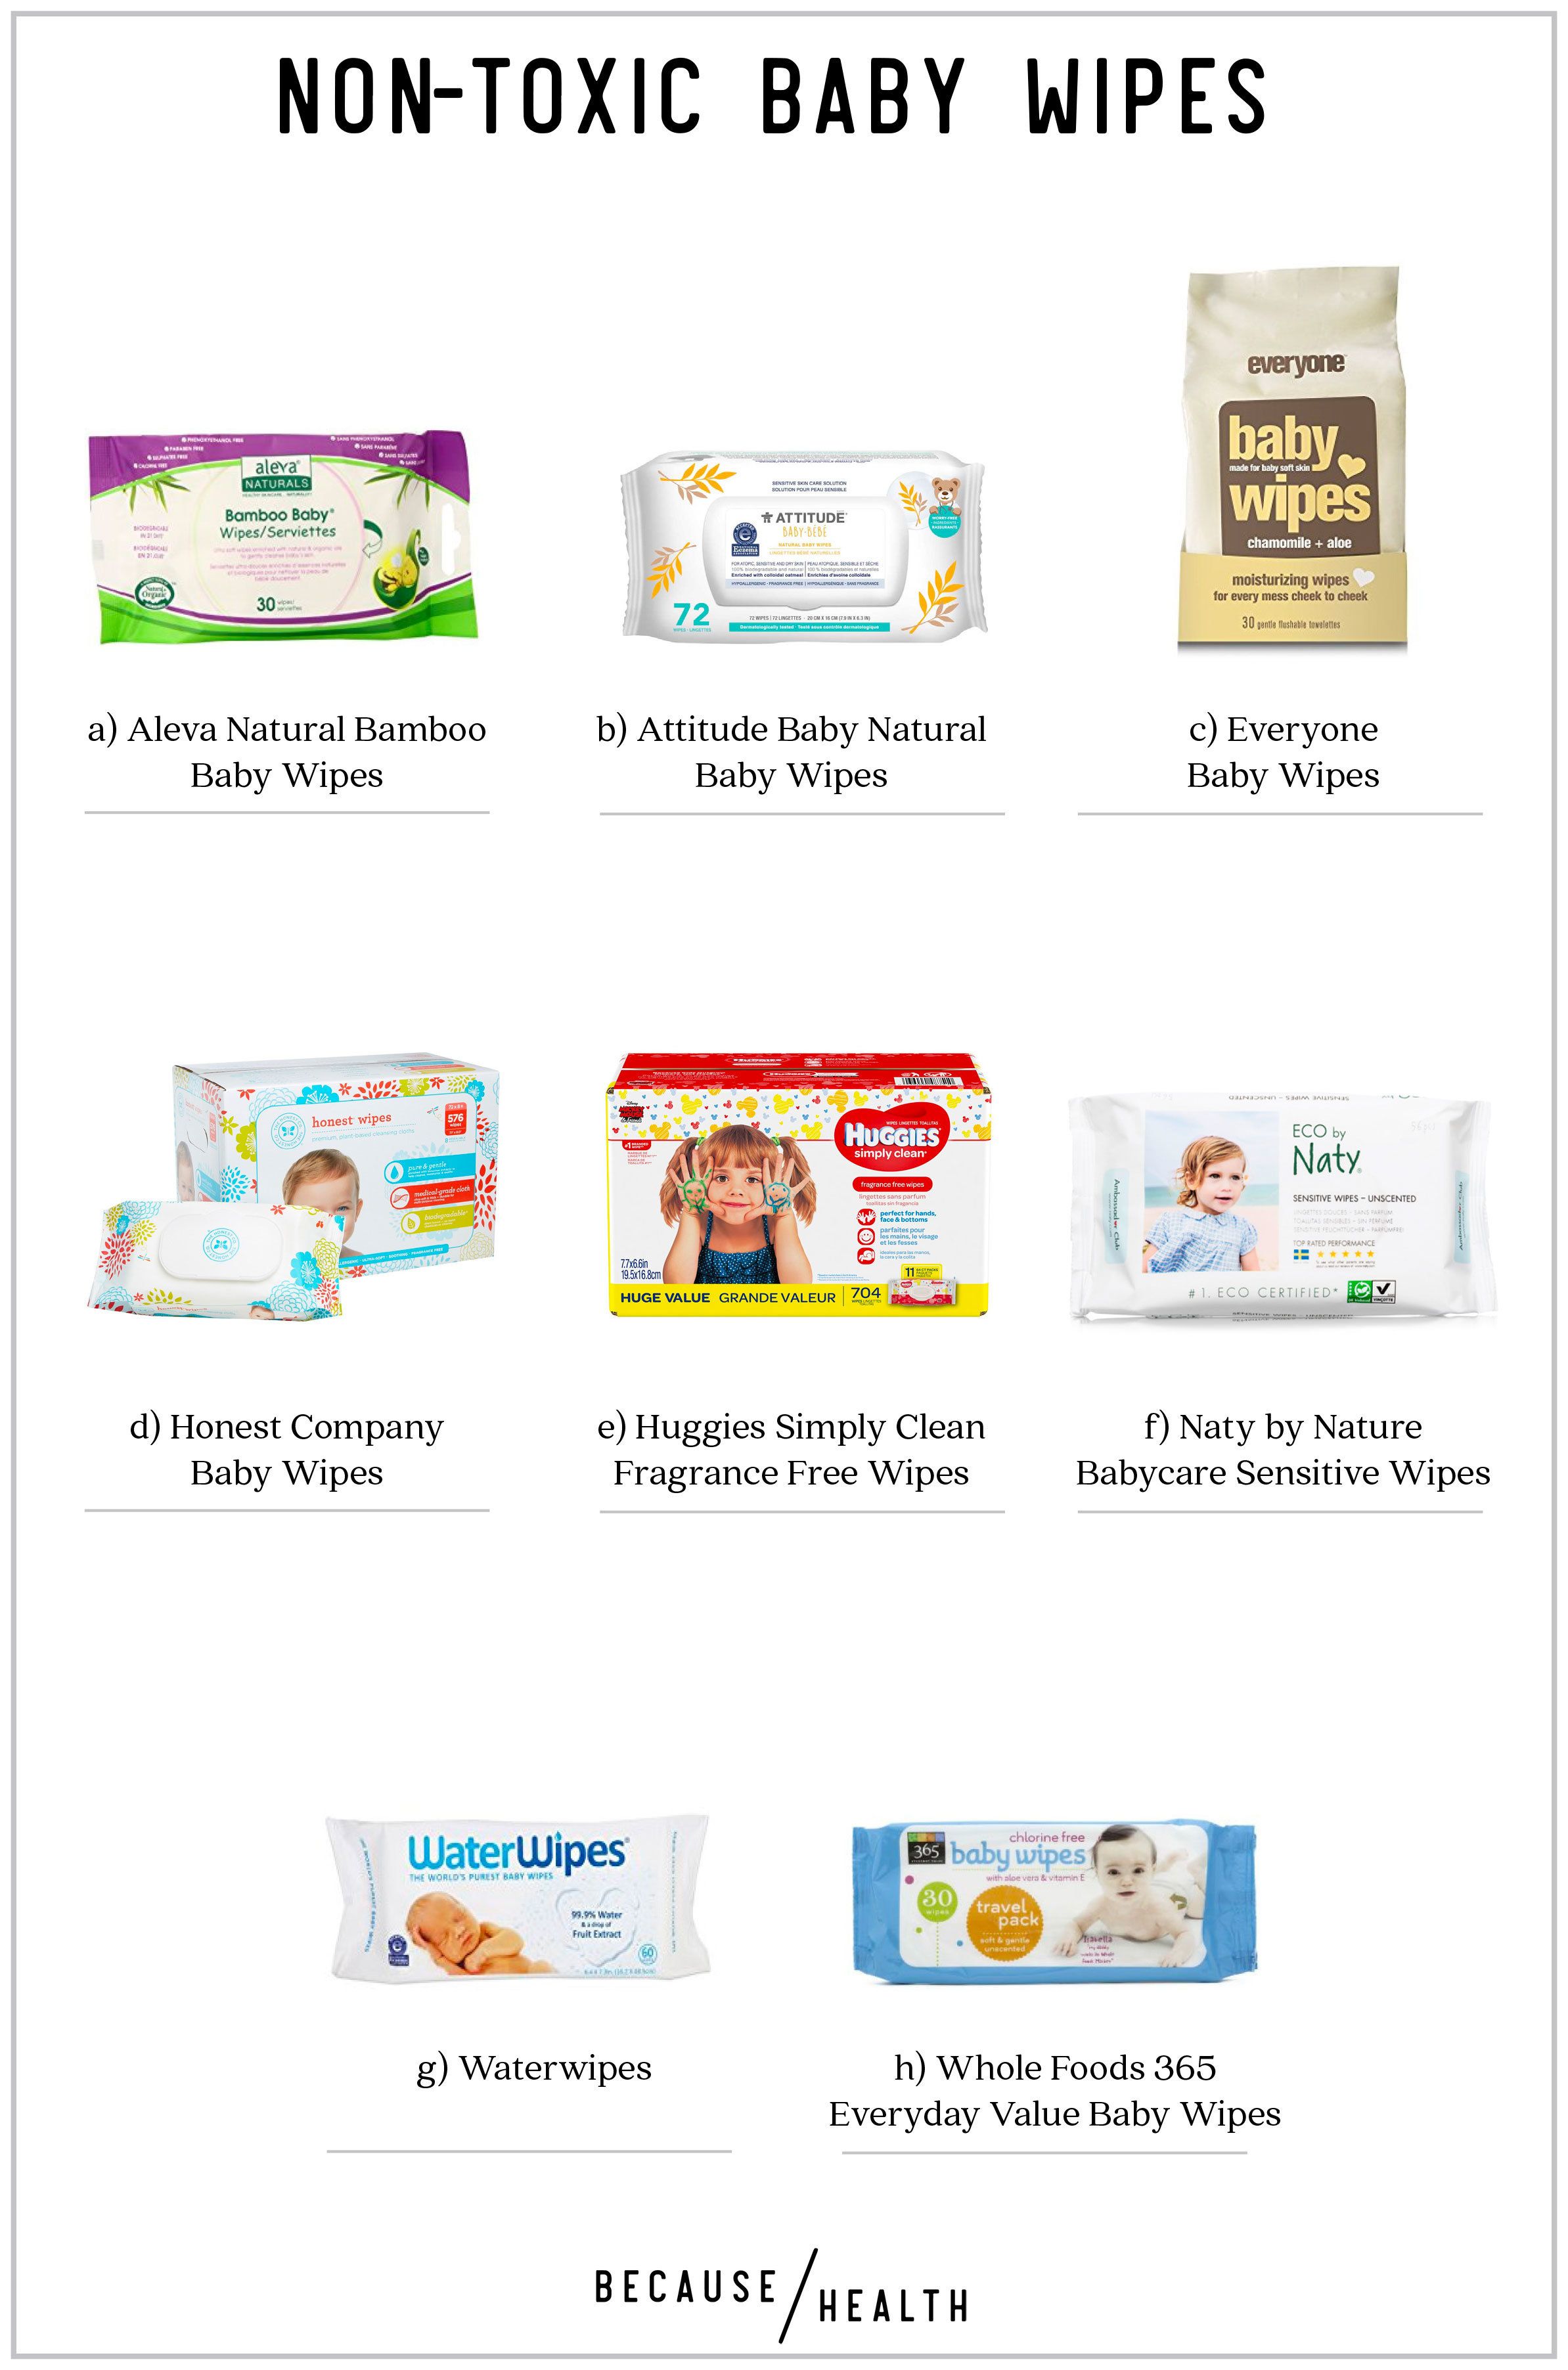 8 Non-Toxic baby wipes - Because Health